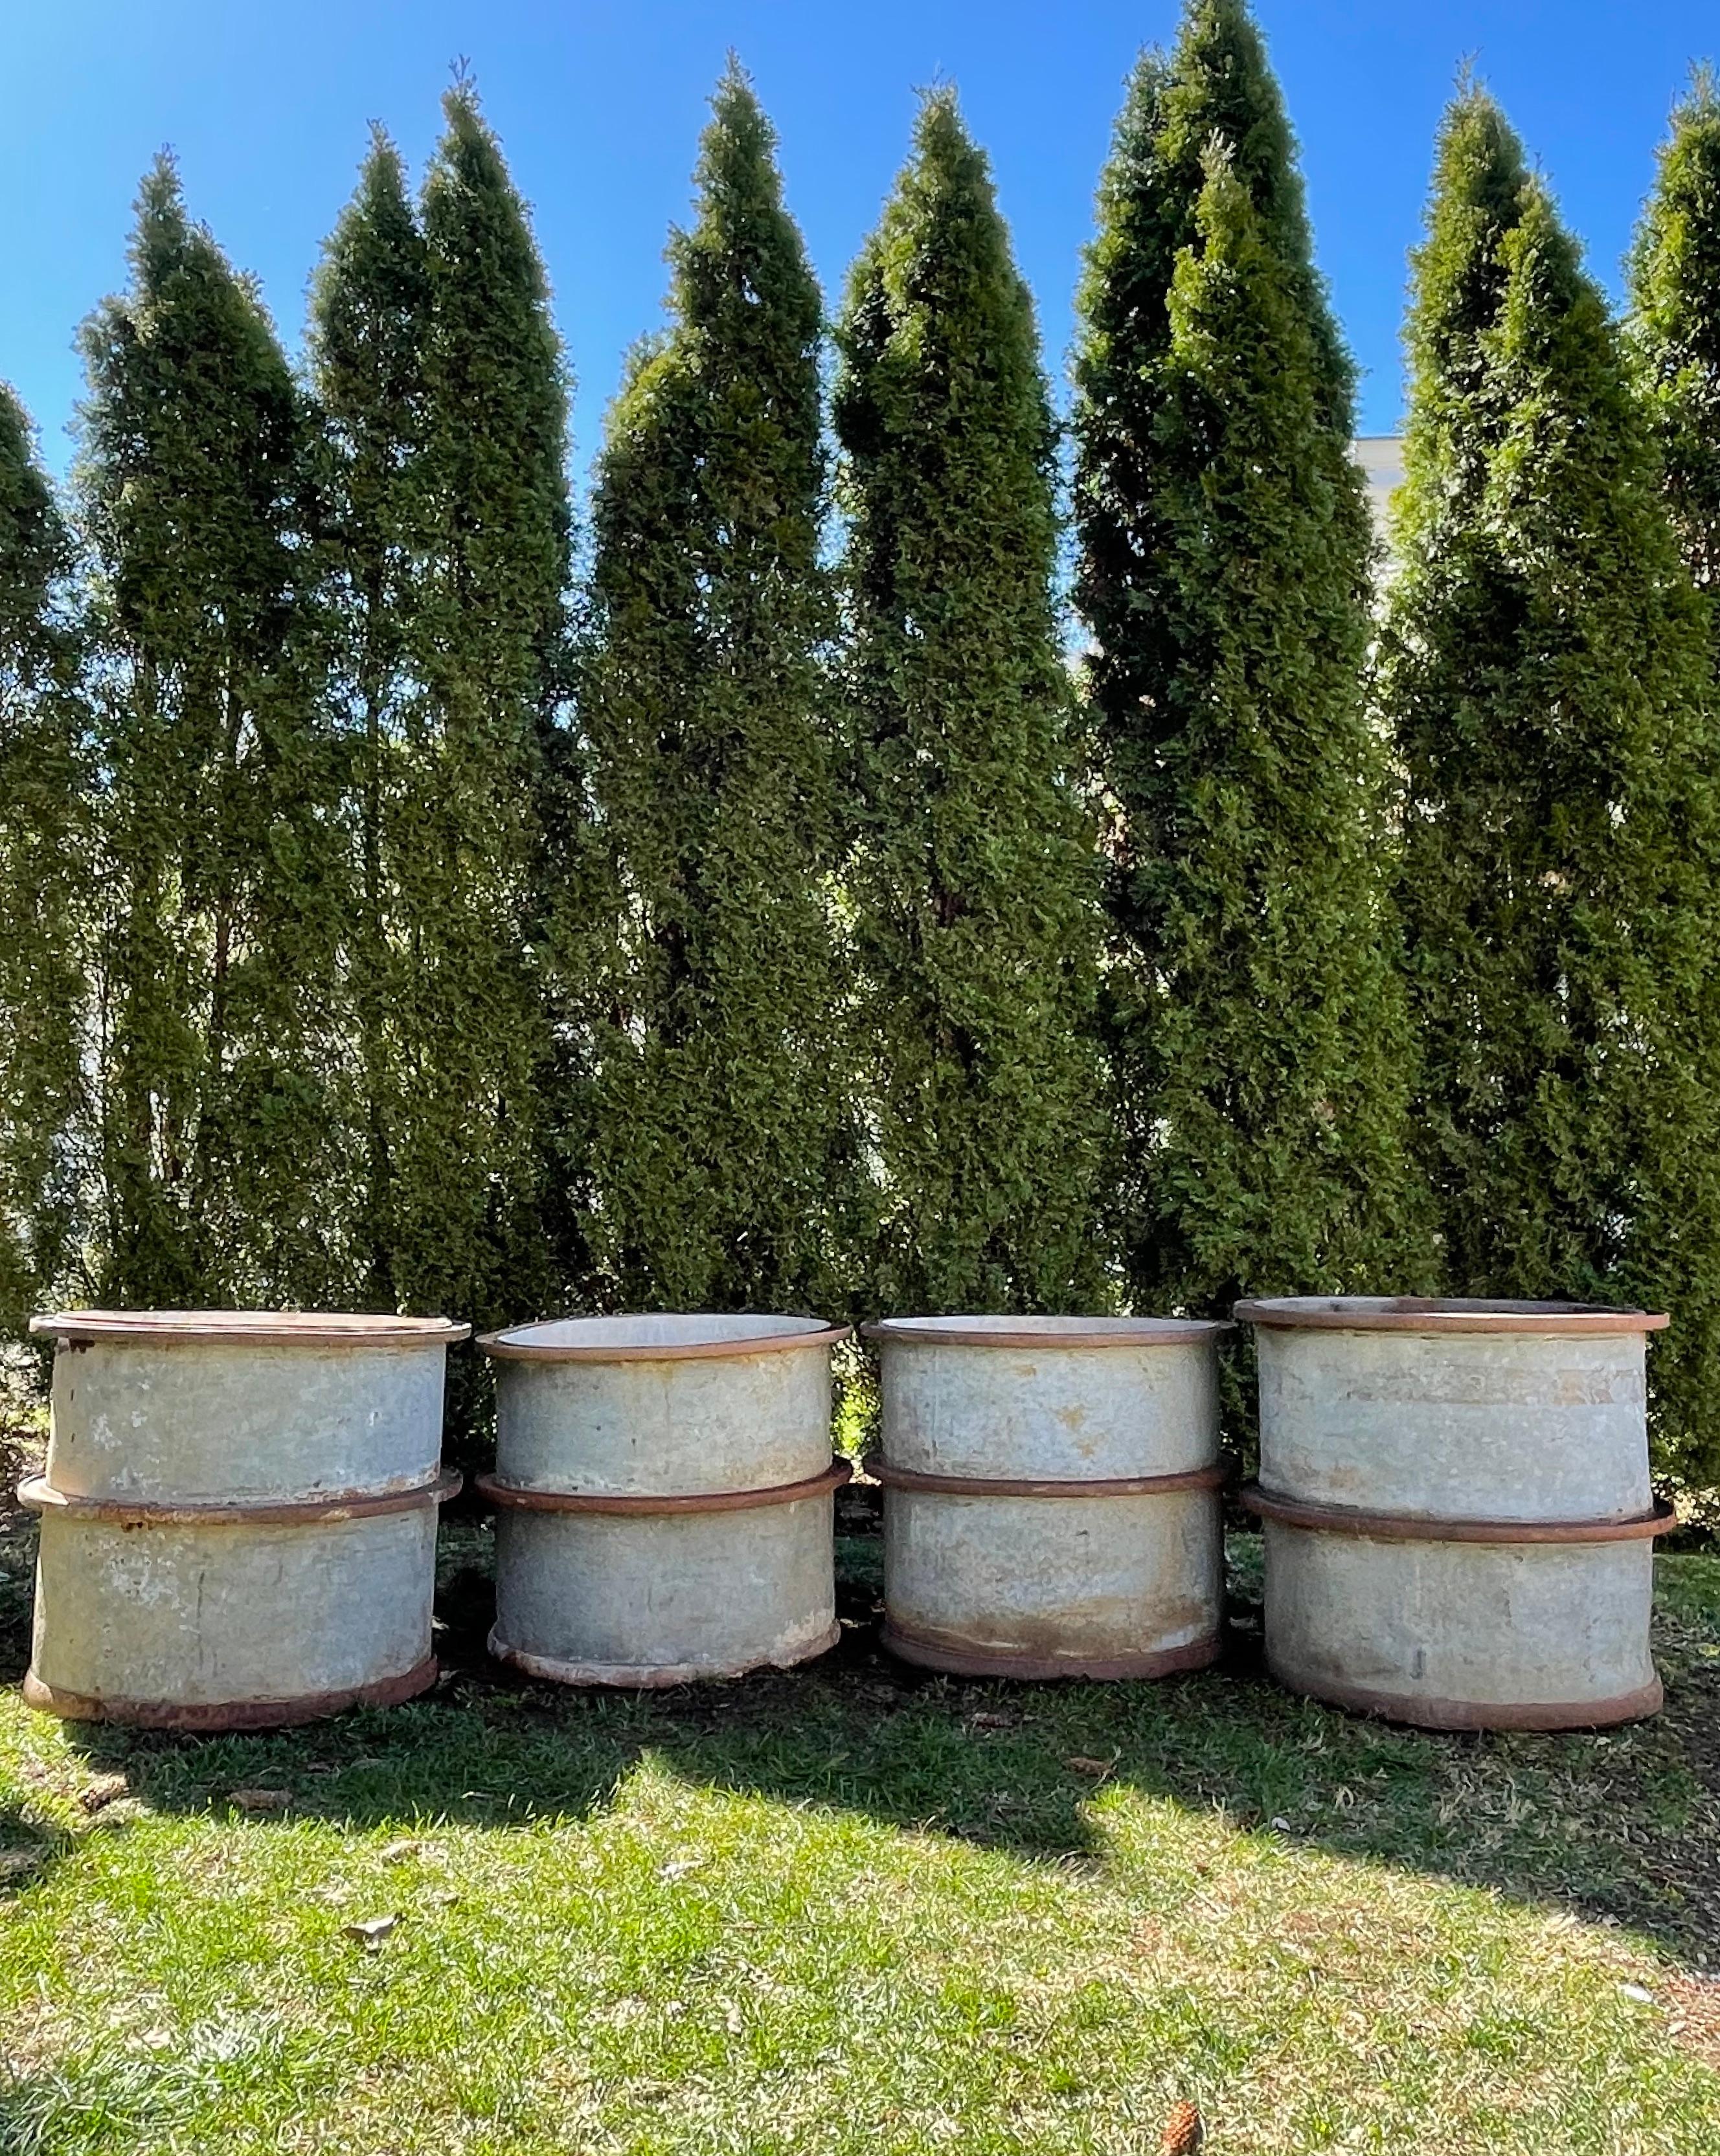 The French Industrial look is so popular with our clients, we couldn’t resist these commodious galvanized tubs with cast iron rims and banding. Originally used as factory storage tubs, they are heavy-duty, make great planters, and are large enough